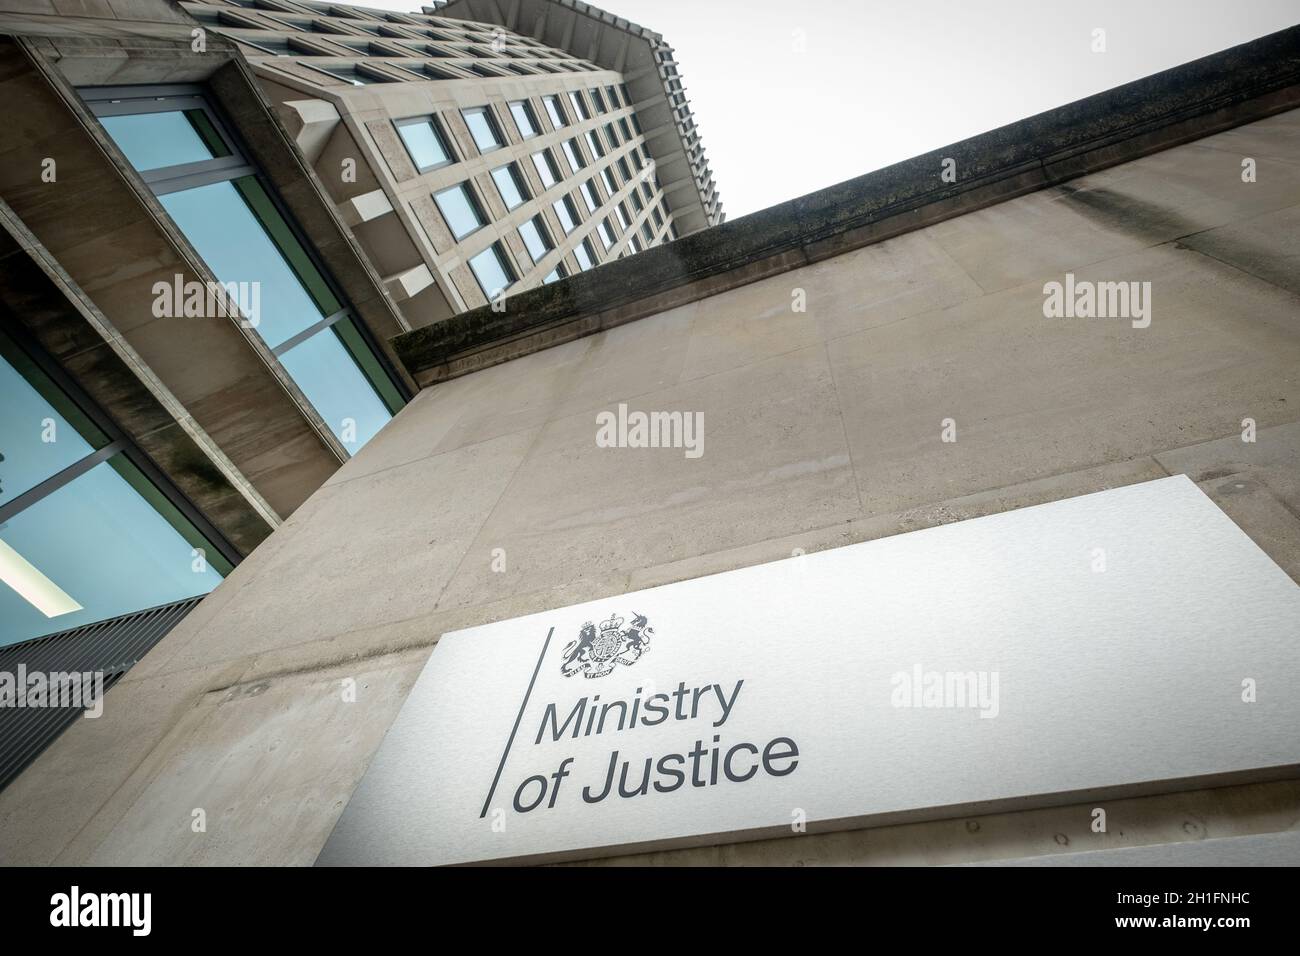 Westminster London- Ministry Of Justice. UK government building Stock Photo